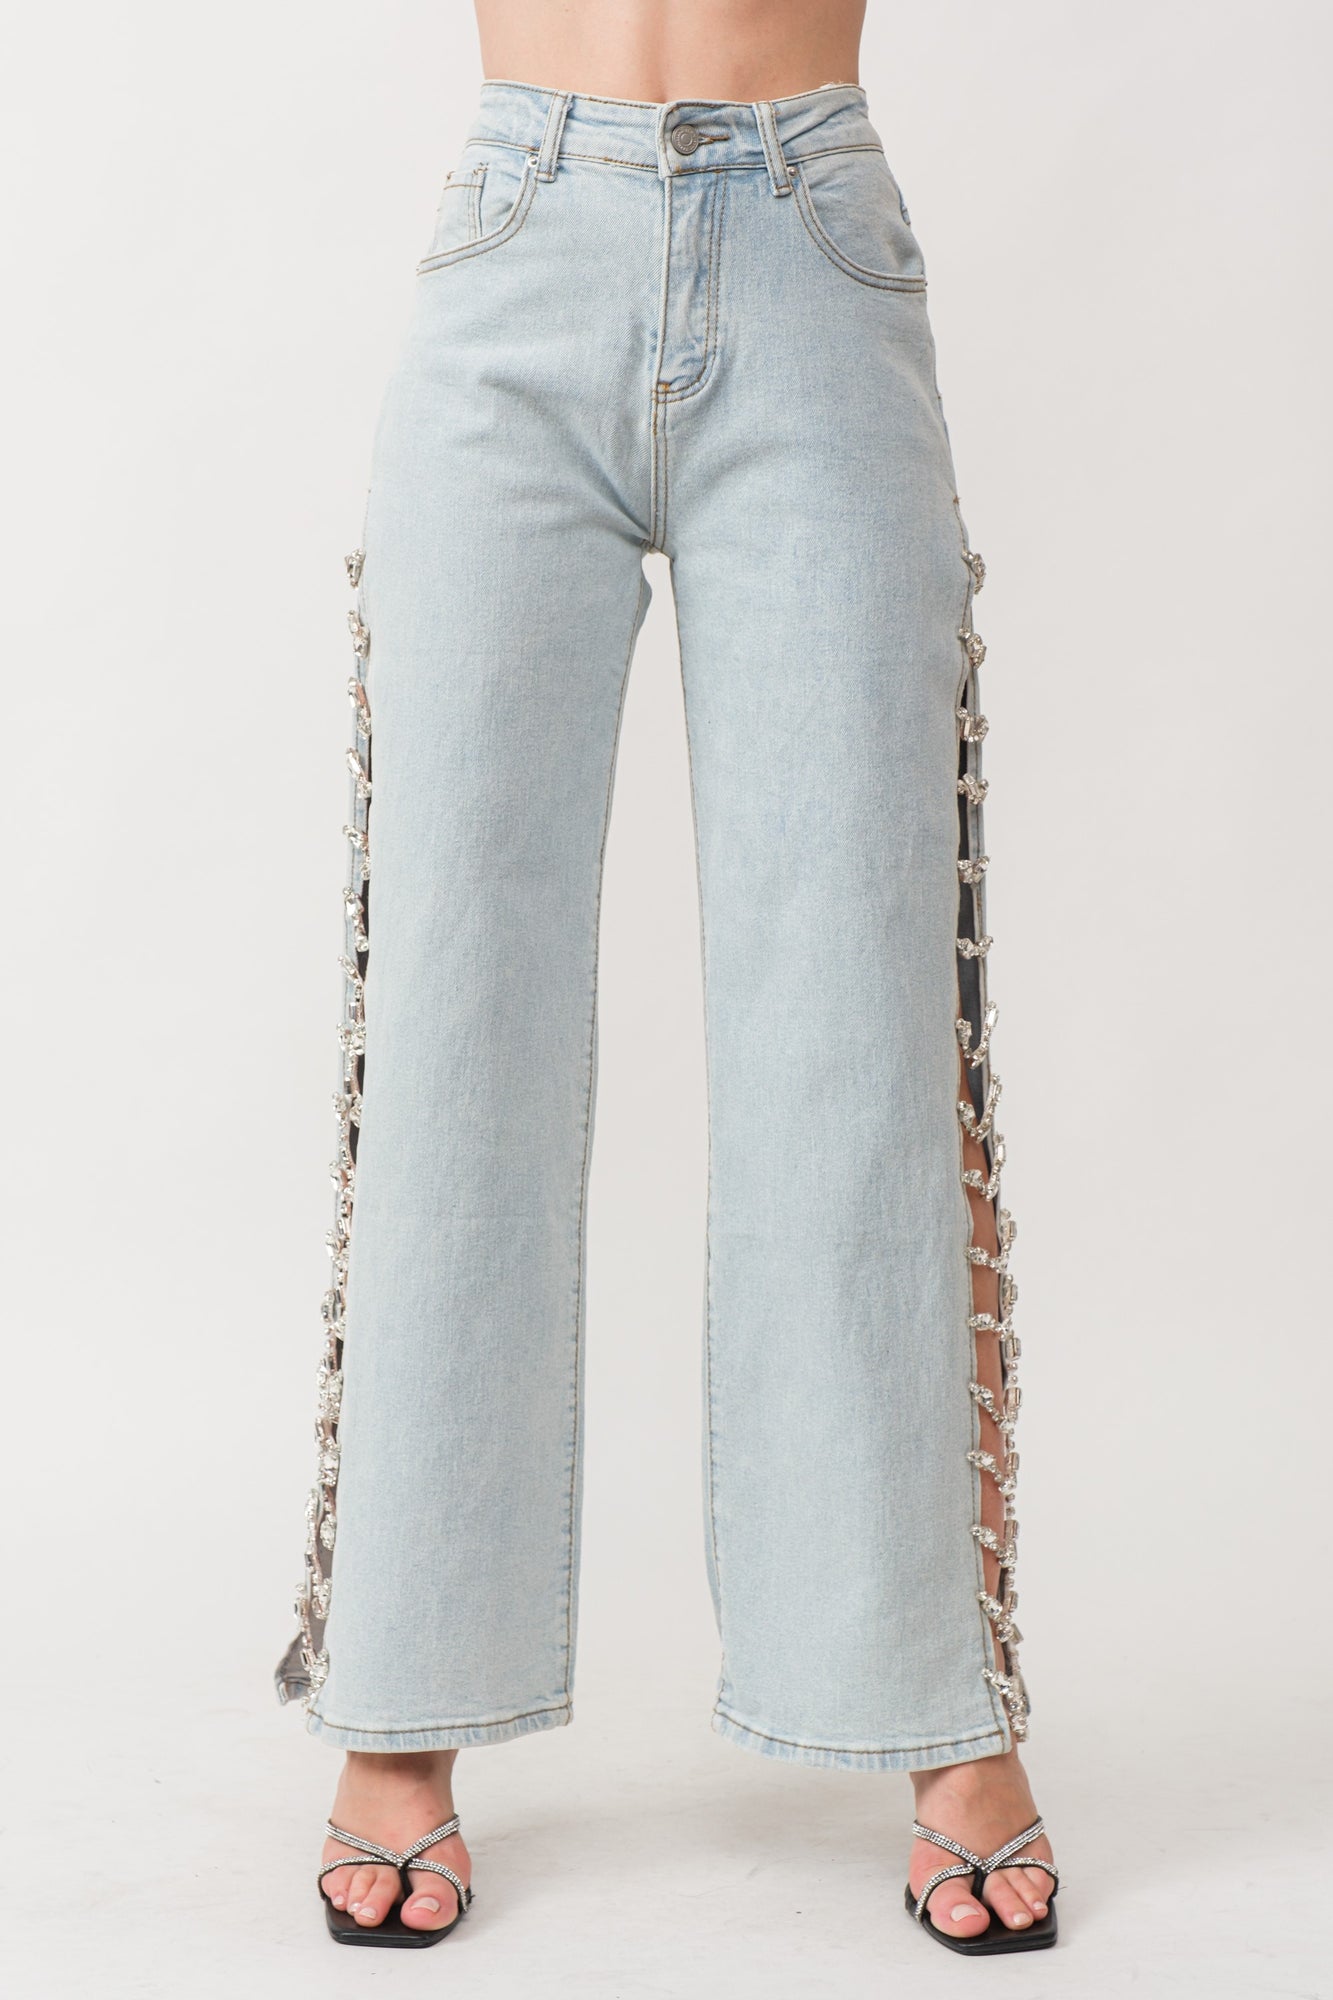 Concert Ready Cotton No Stretch SIDE Panel Rhinestone Jeans in 2023